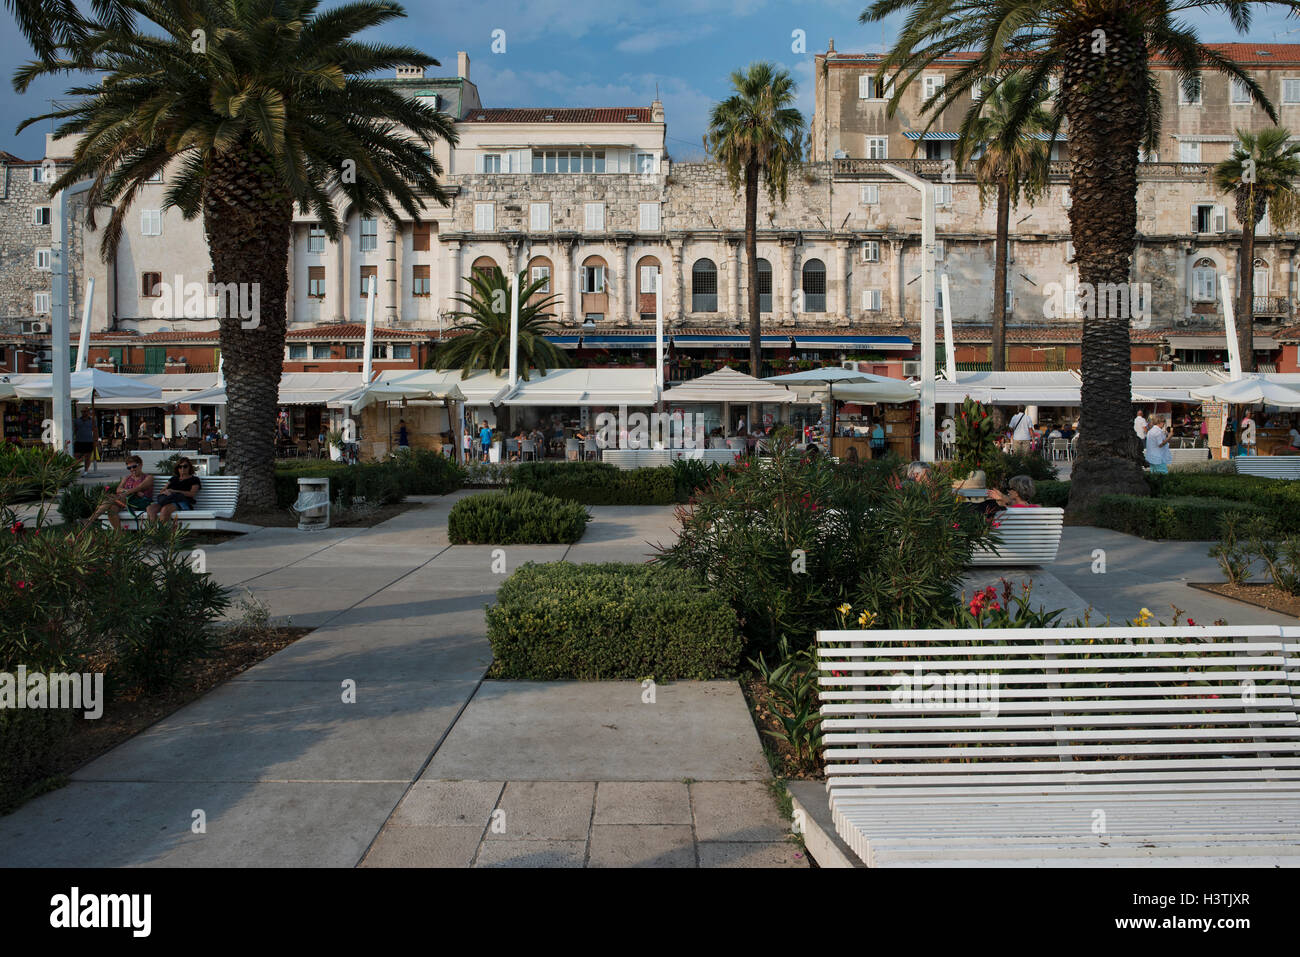 View on the Riva waterfront promenade in front of the southern facade of the Diocletian's Palace. Split, Split-Dalmatia County, Croatia. Stock Photo